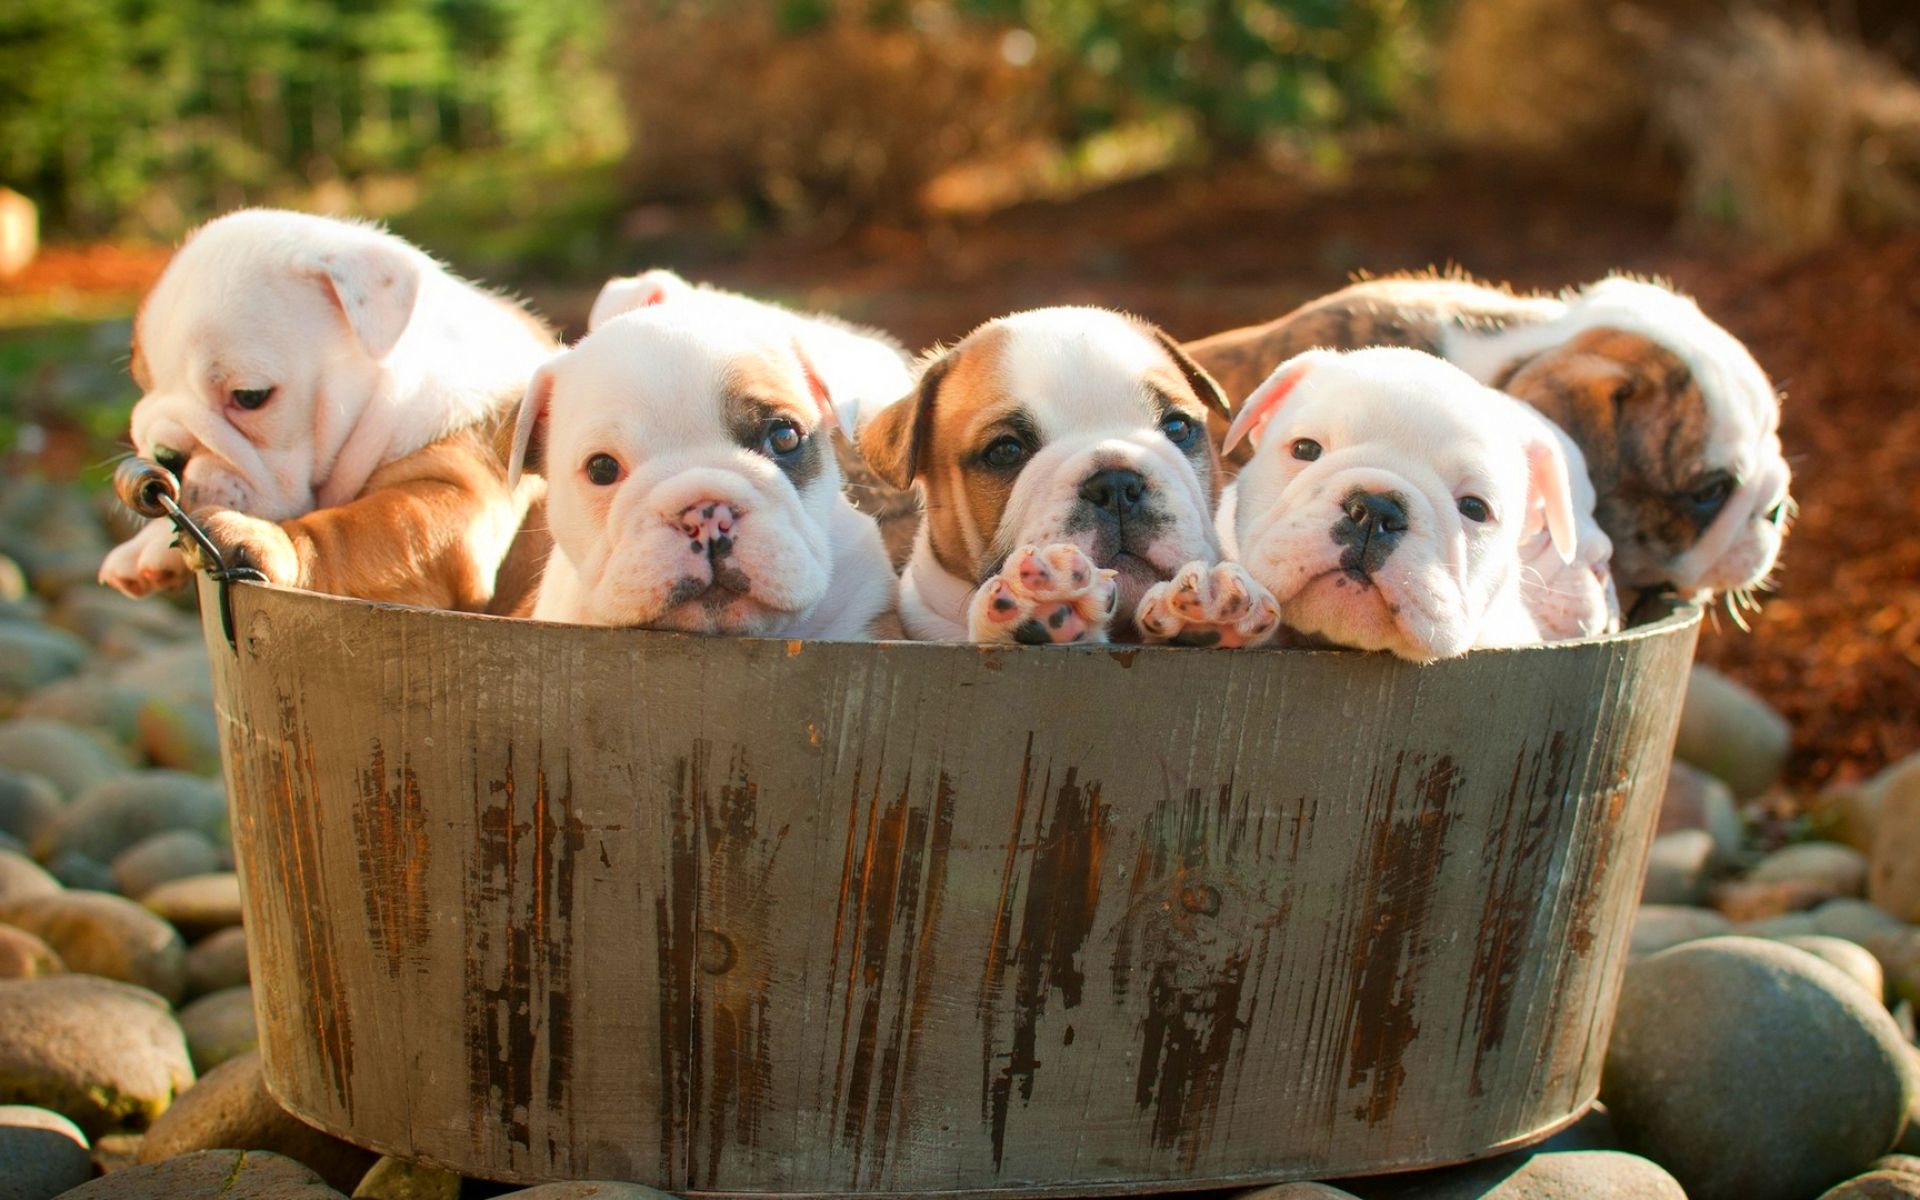 Download wallpaper English Bulldog, puppies, cute animals, pets, basket, English Bulldog Dogs, funny dog for desktop with resolution 1920x1200. High Quality HD picture wallpaper